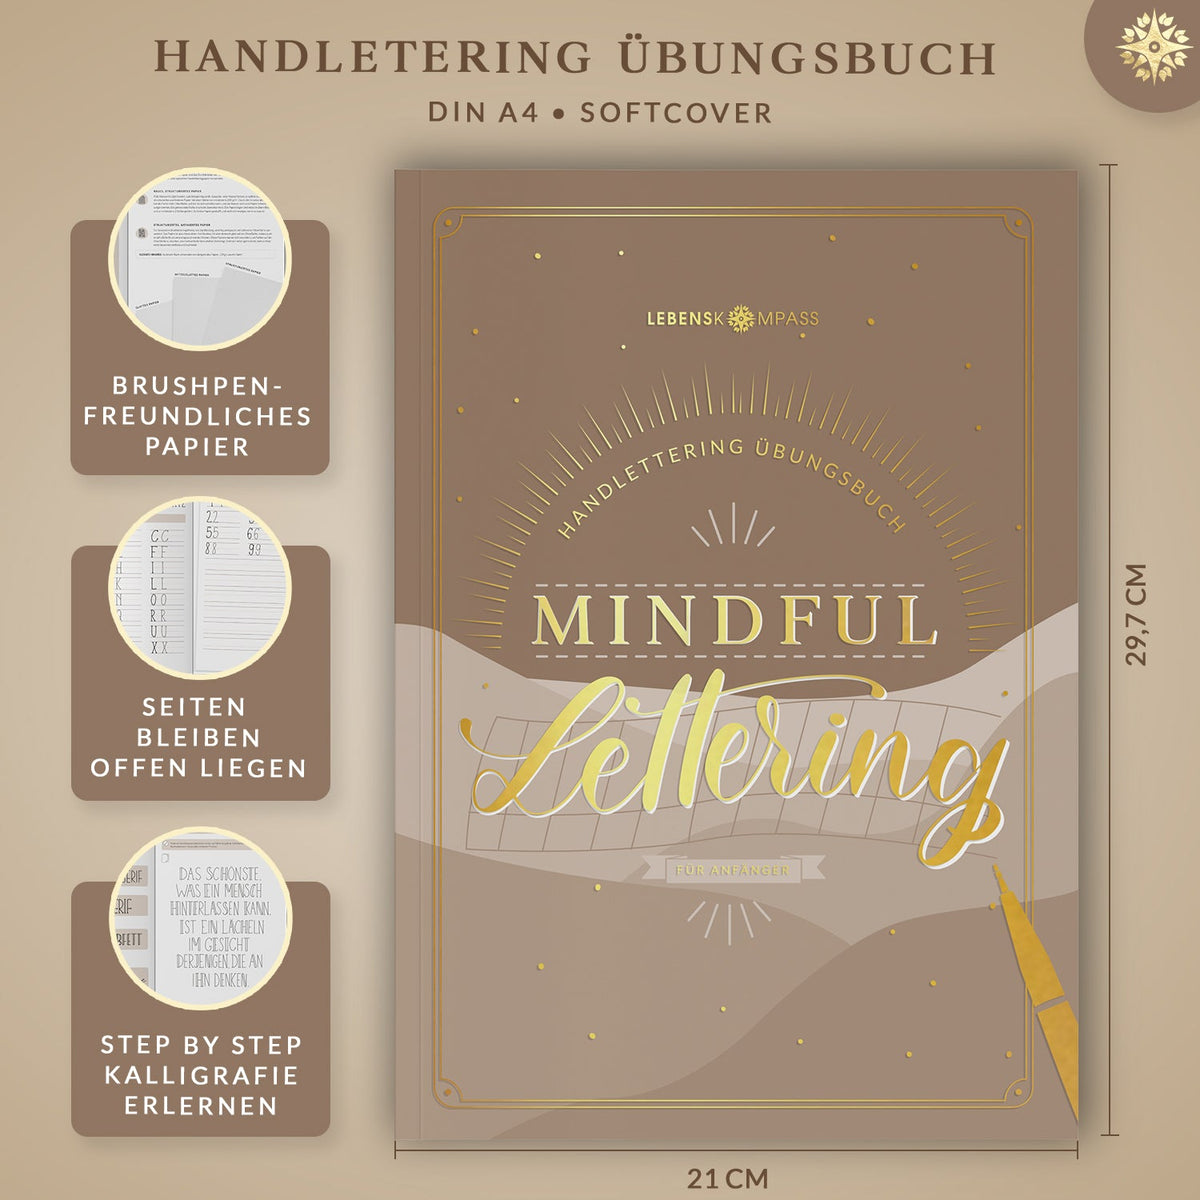 Handlettering Übungsbuch "Mindful Lettering"